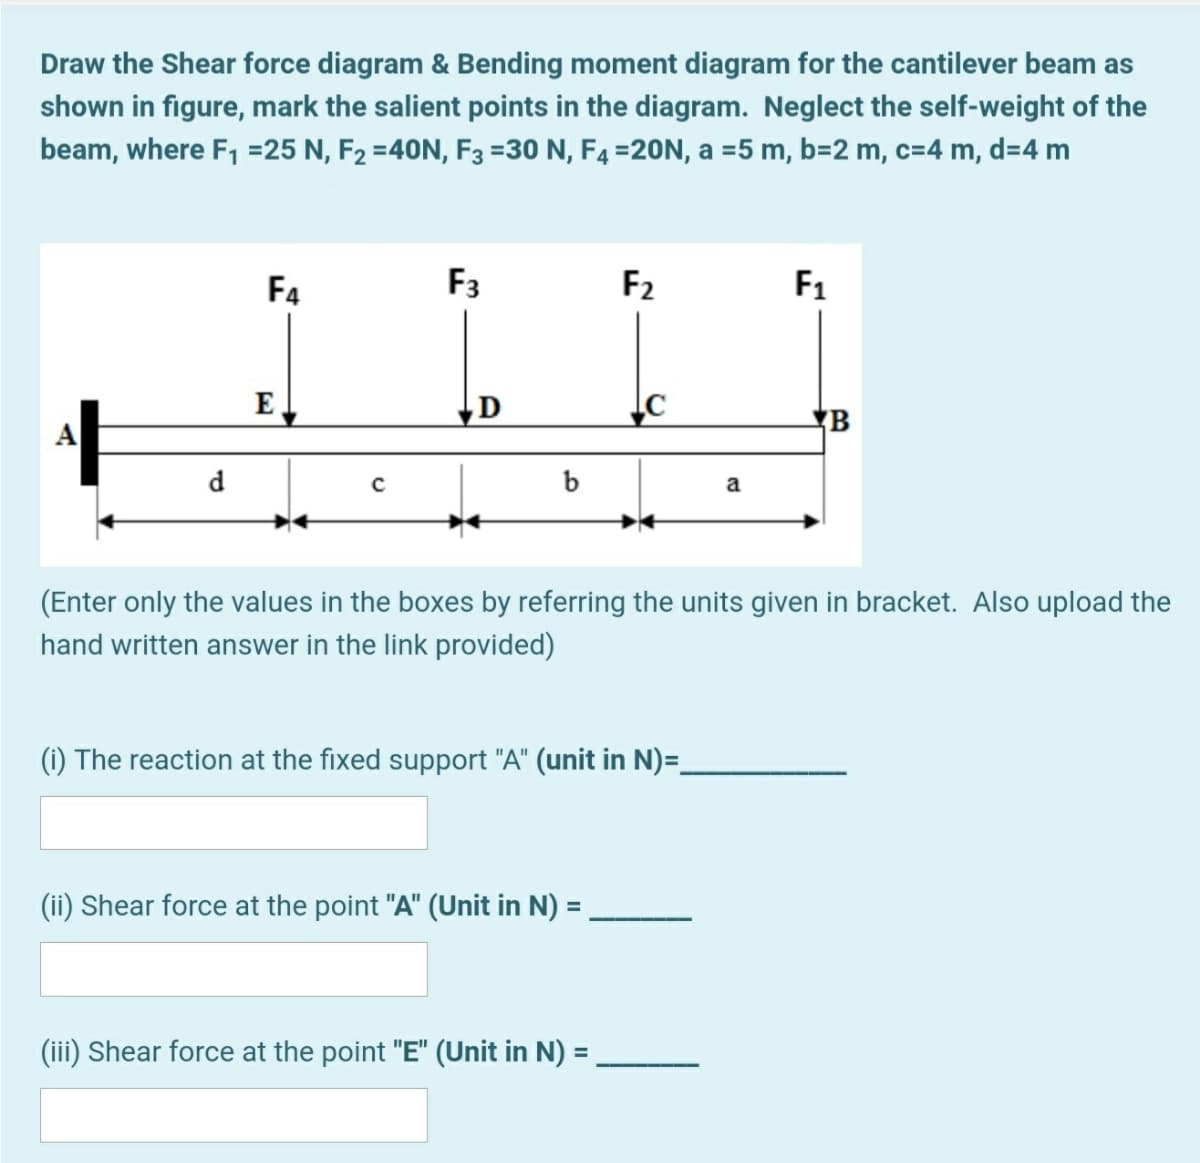 Draw the Shear force diagram & Bending moment diagram for the cantilever beam as
shown in figure, mark the salient points in the diagram. Neglect the self-weight of the
beam, where F, =25 N, F2 =40N, F3 =30 N, F4 =20N, a =5 m, b=2 m, c=4 m, d=4 m
F4
F3
F2
F1
E
D
A
d.
b
a
(Enter only the values in the boxes by referring the units given in bracket. Also upload the
hand written answer in the link provided)
(i) The reaction at the fixed support "A" (unit in N)=_
(ii) Shear force at the point "A" (Unit in N) =
%3D
(iii) Shear force at the point "E" (Unit in N) =
%3D
